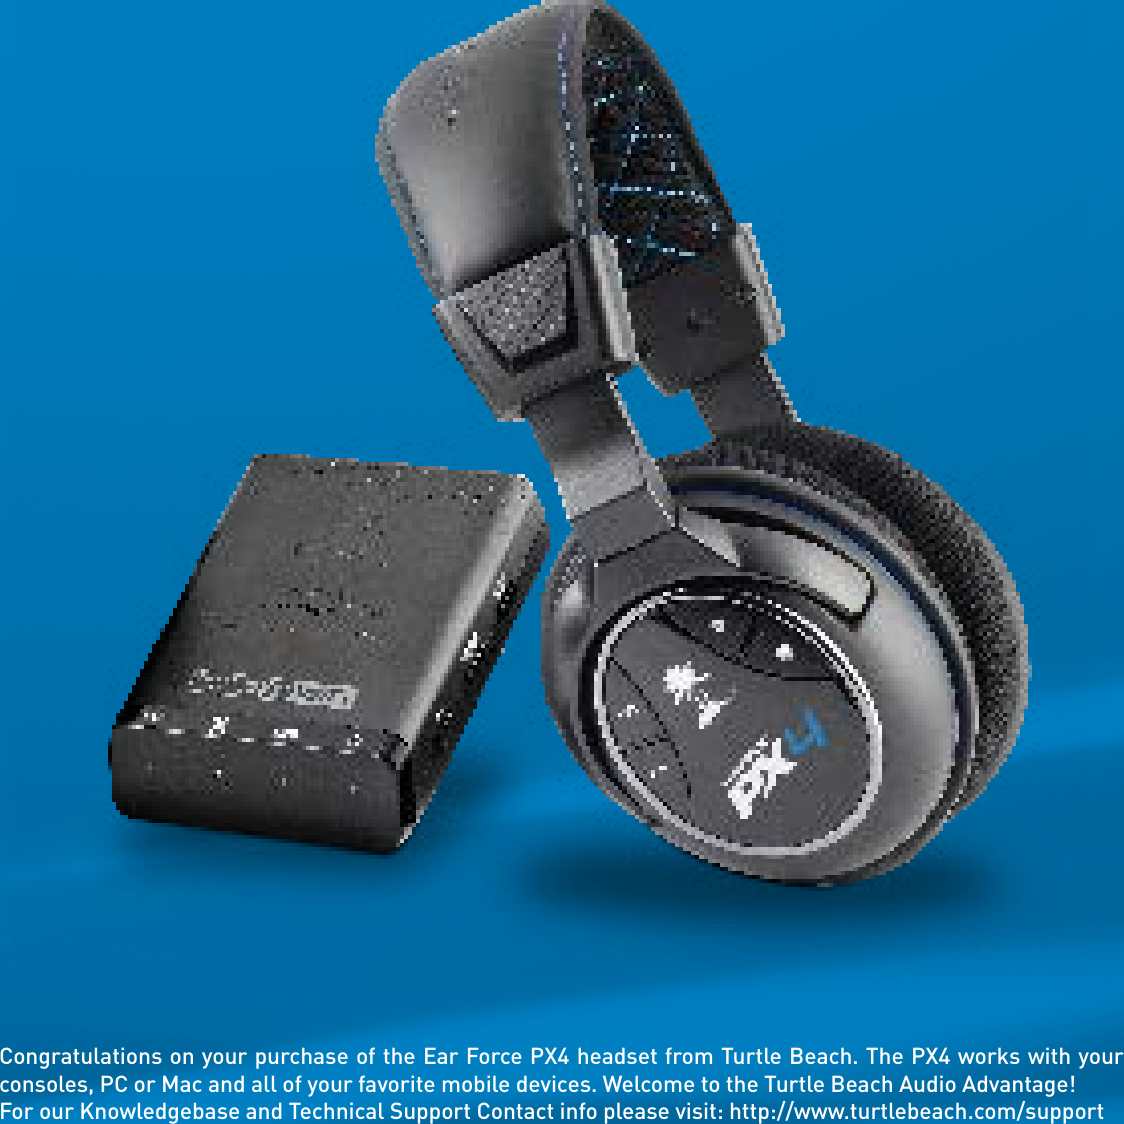 Congratulations on your purchase of the Ear Force PX4 headset from Turtle Beach. The PX4 works with your consoles, PC or Mac and all of your favorite mobile devices. Welcome to the Turtle Beach Audio Advantage!For our Knowledgebase and Technical Support Contact info please visit: http://www.turtlebeach.com/support